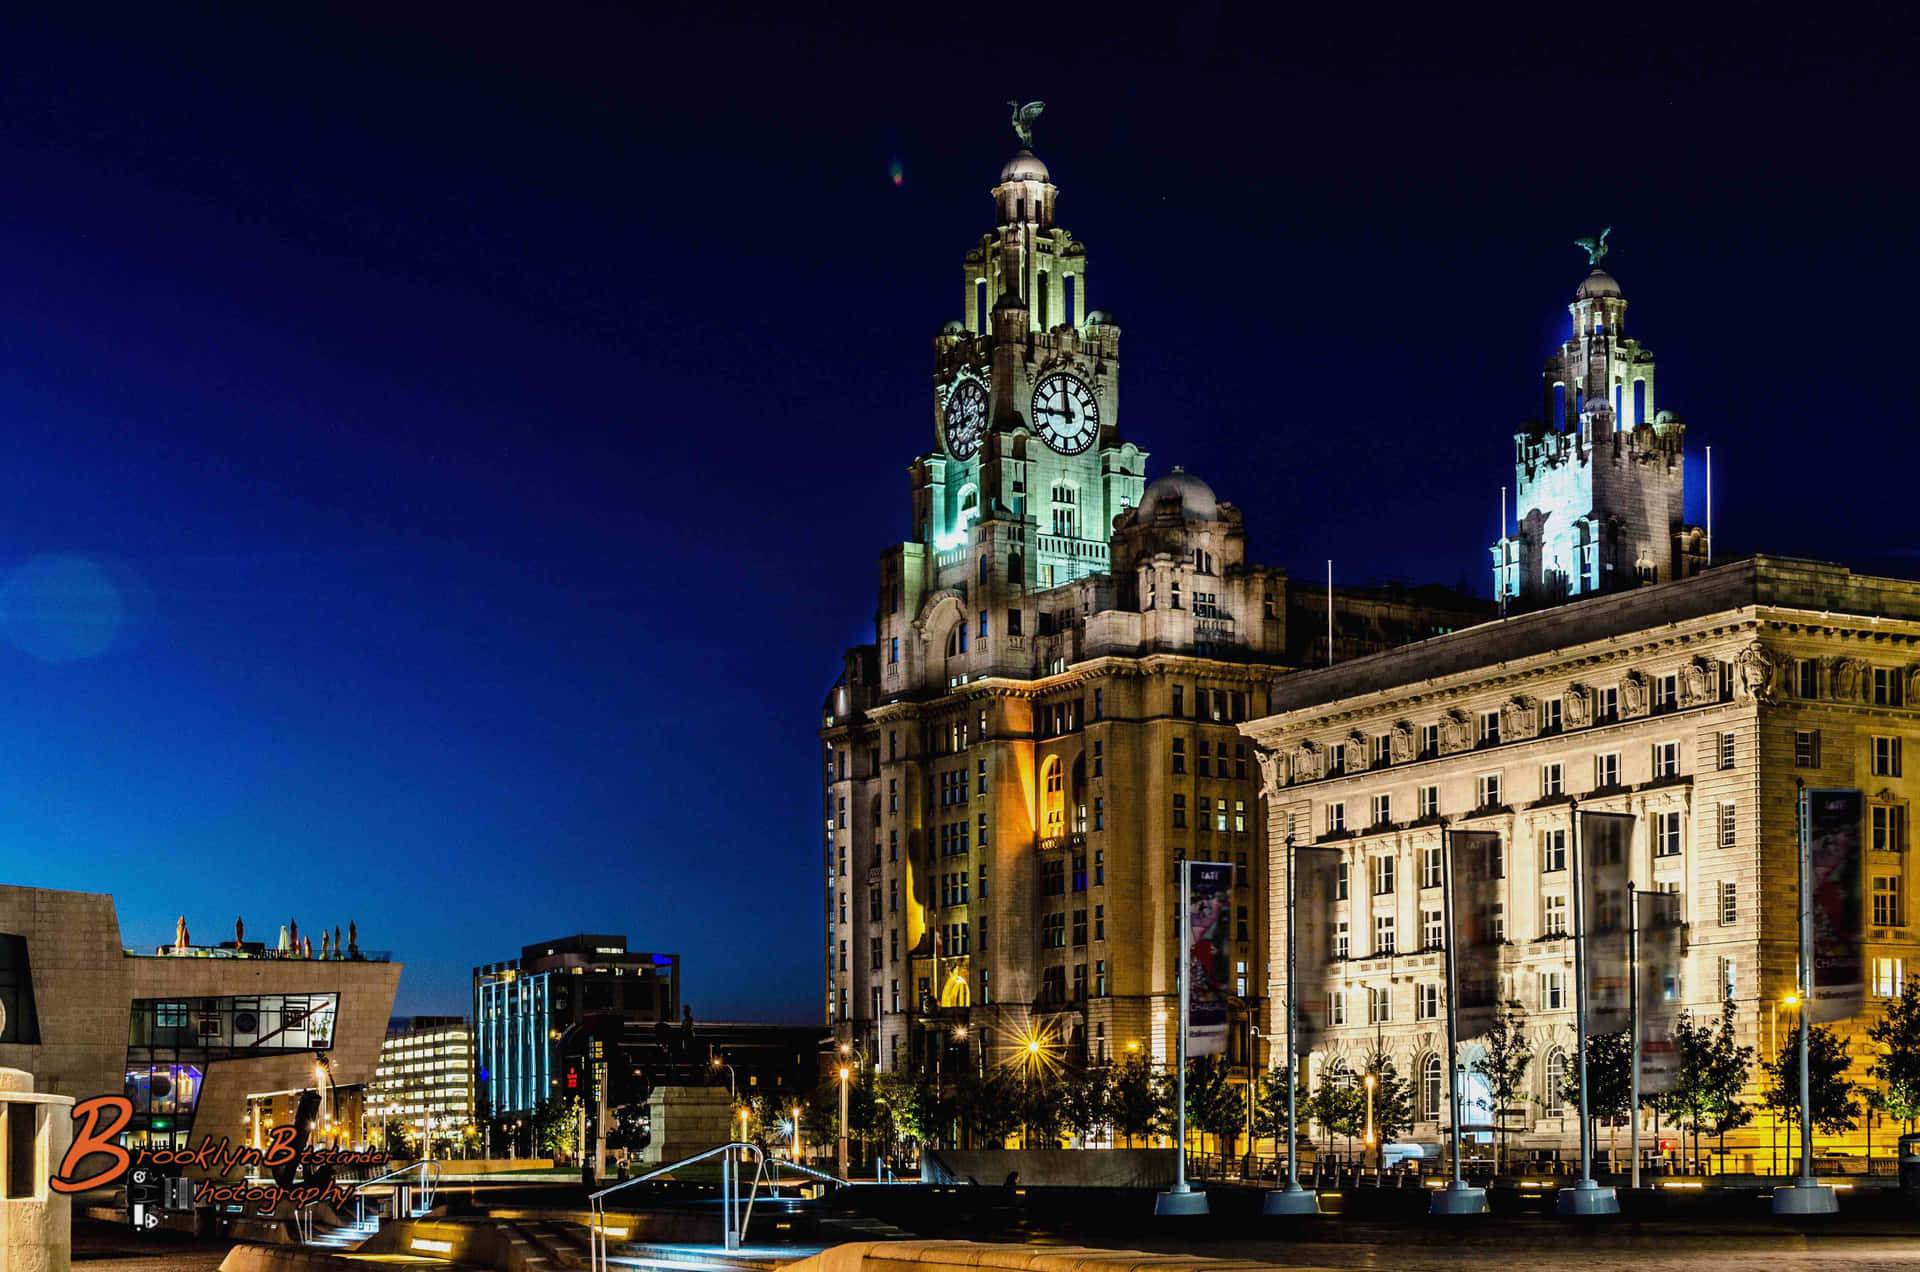 The beautiful waterfront of Liverpool, England